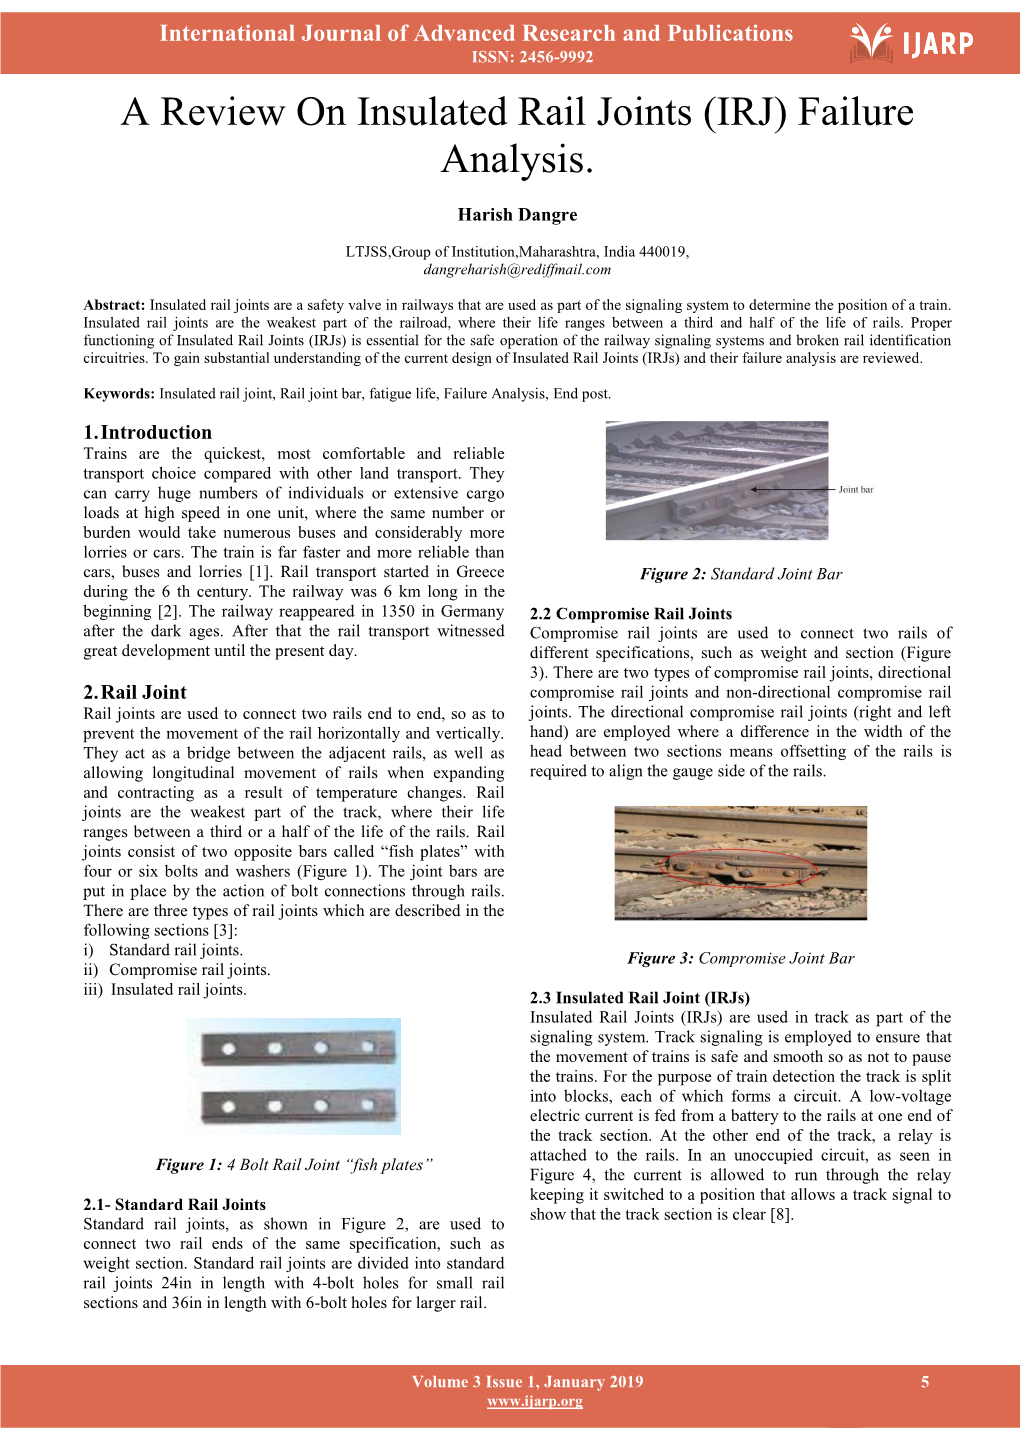 A Review on Insulated Rail Joints (IRJ) Failure Analysis